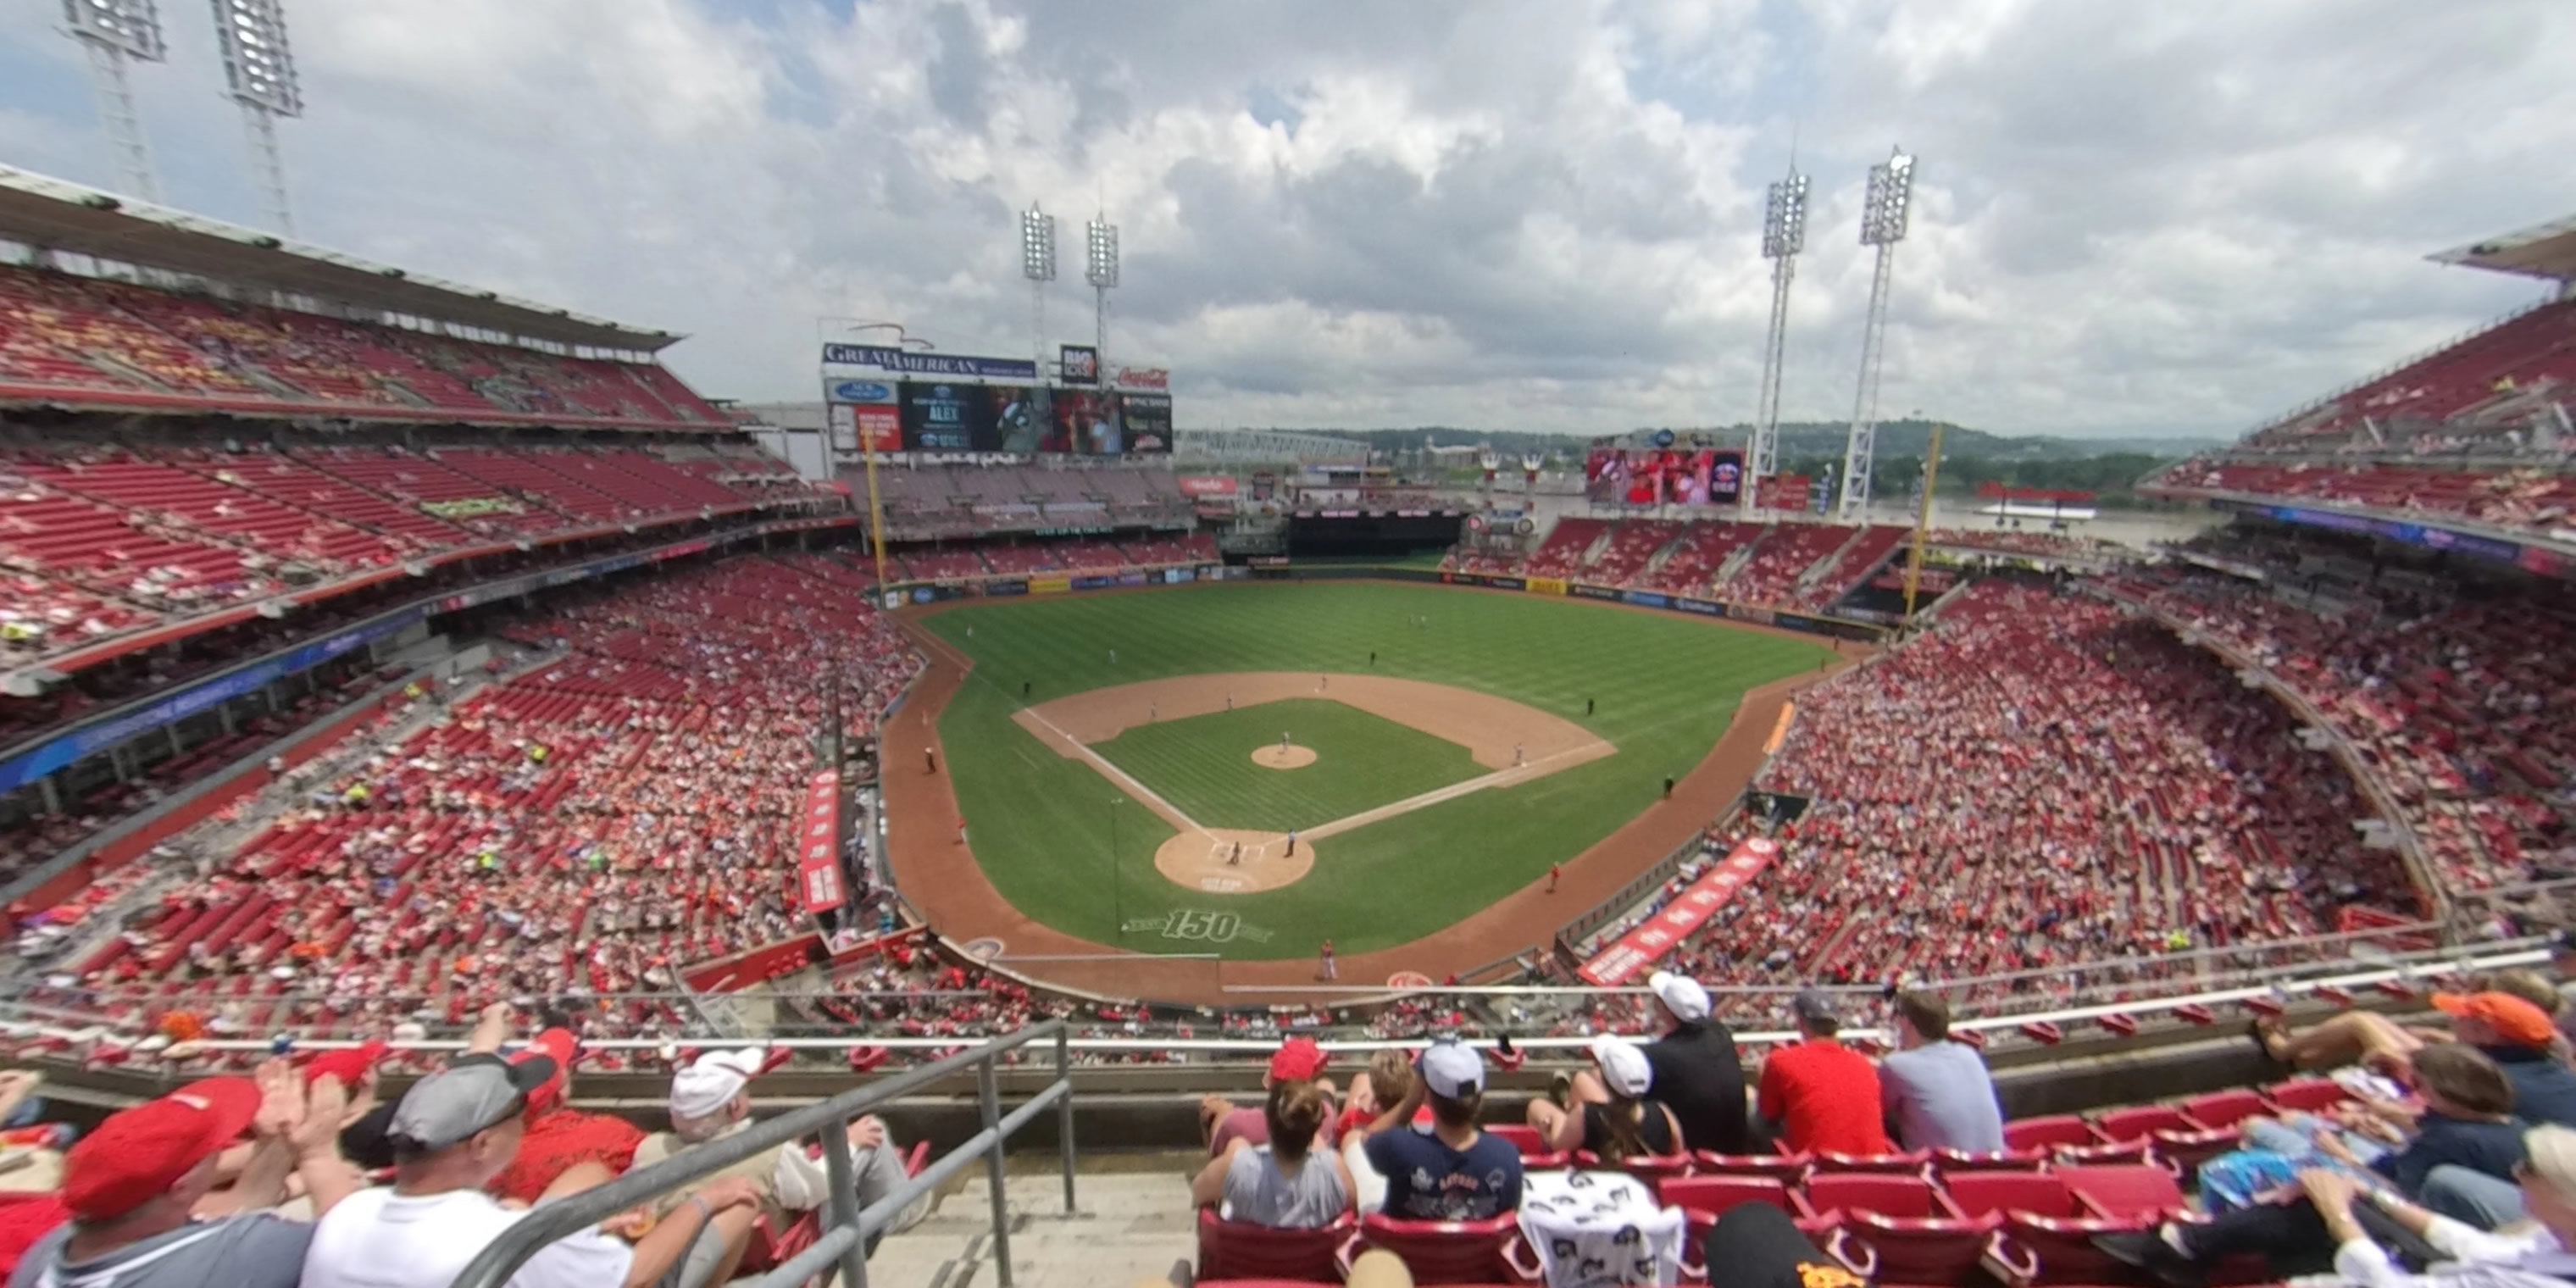 Section 424 at Great American Ball Park 